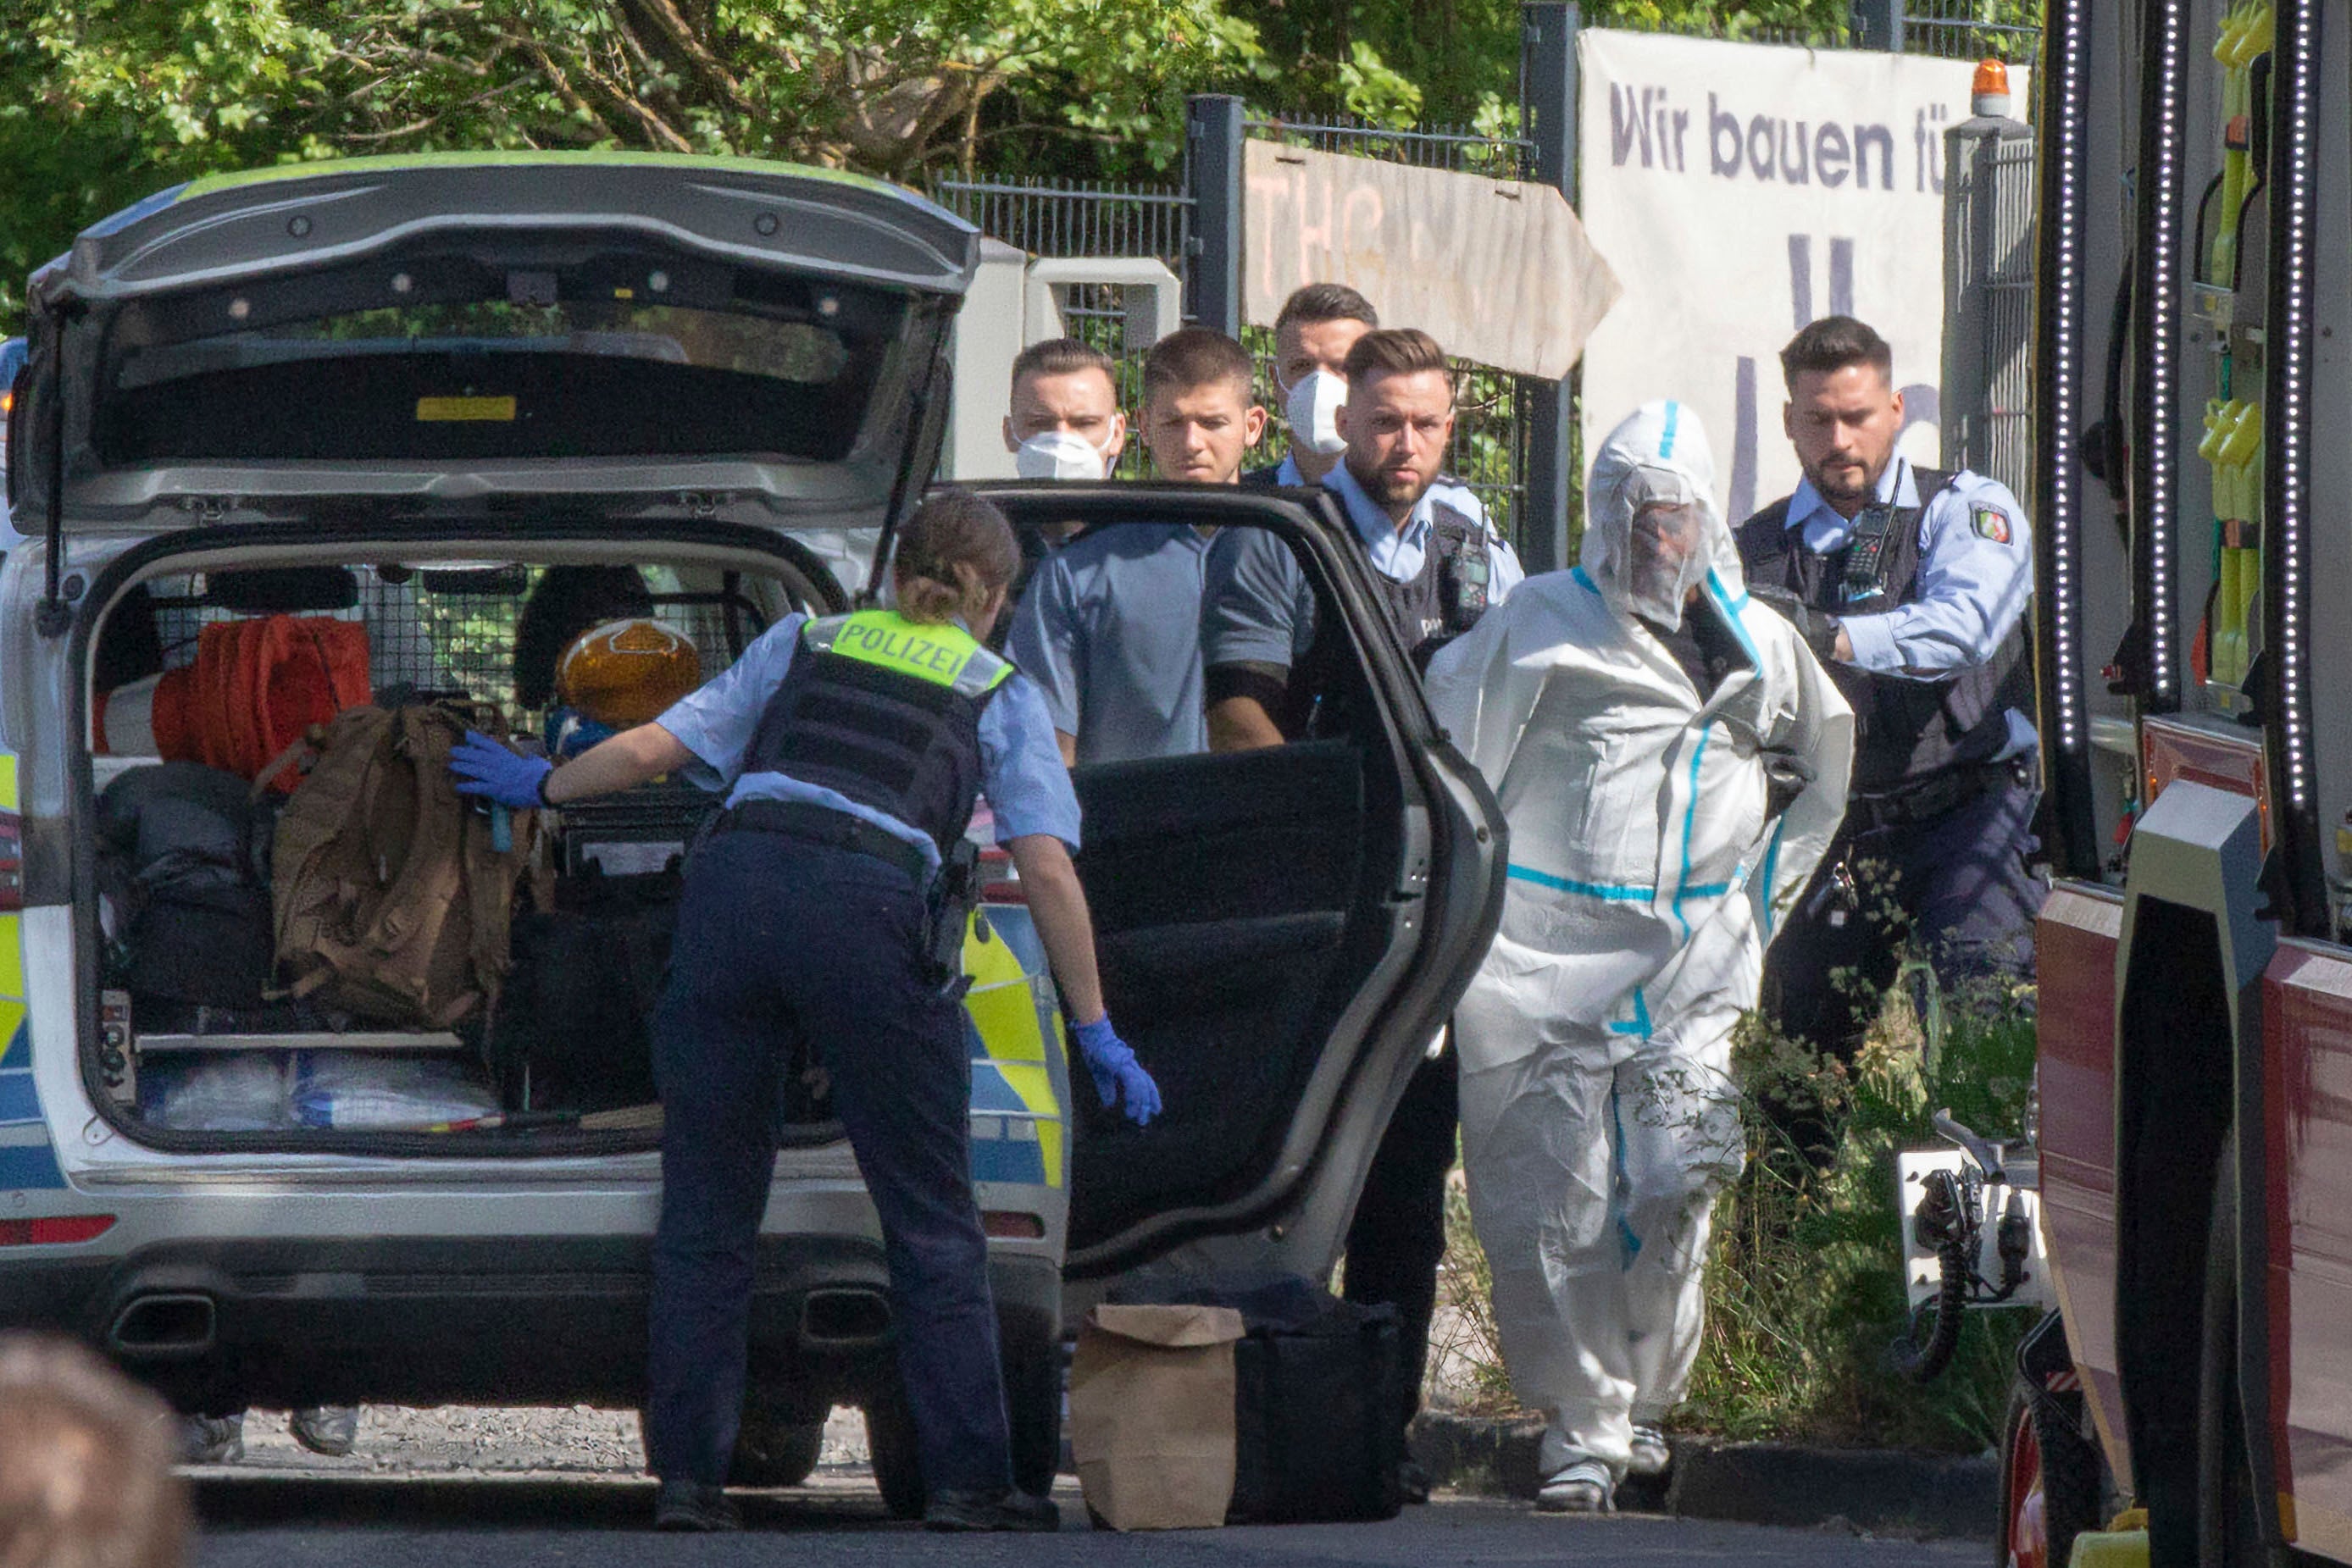 Germany’s interior minister said the suspect, pictured in a full body suit, was already known to authorities